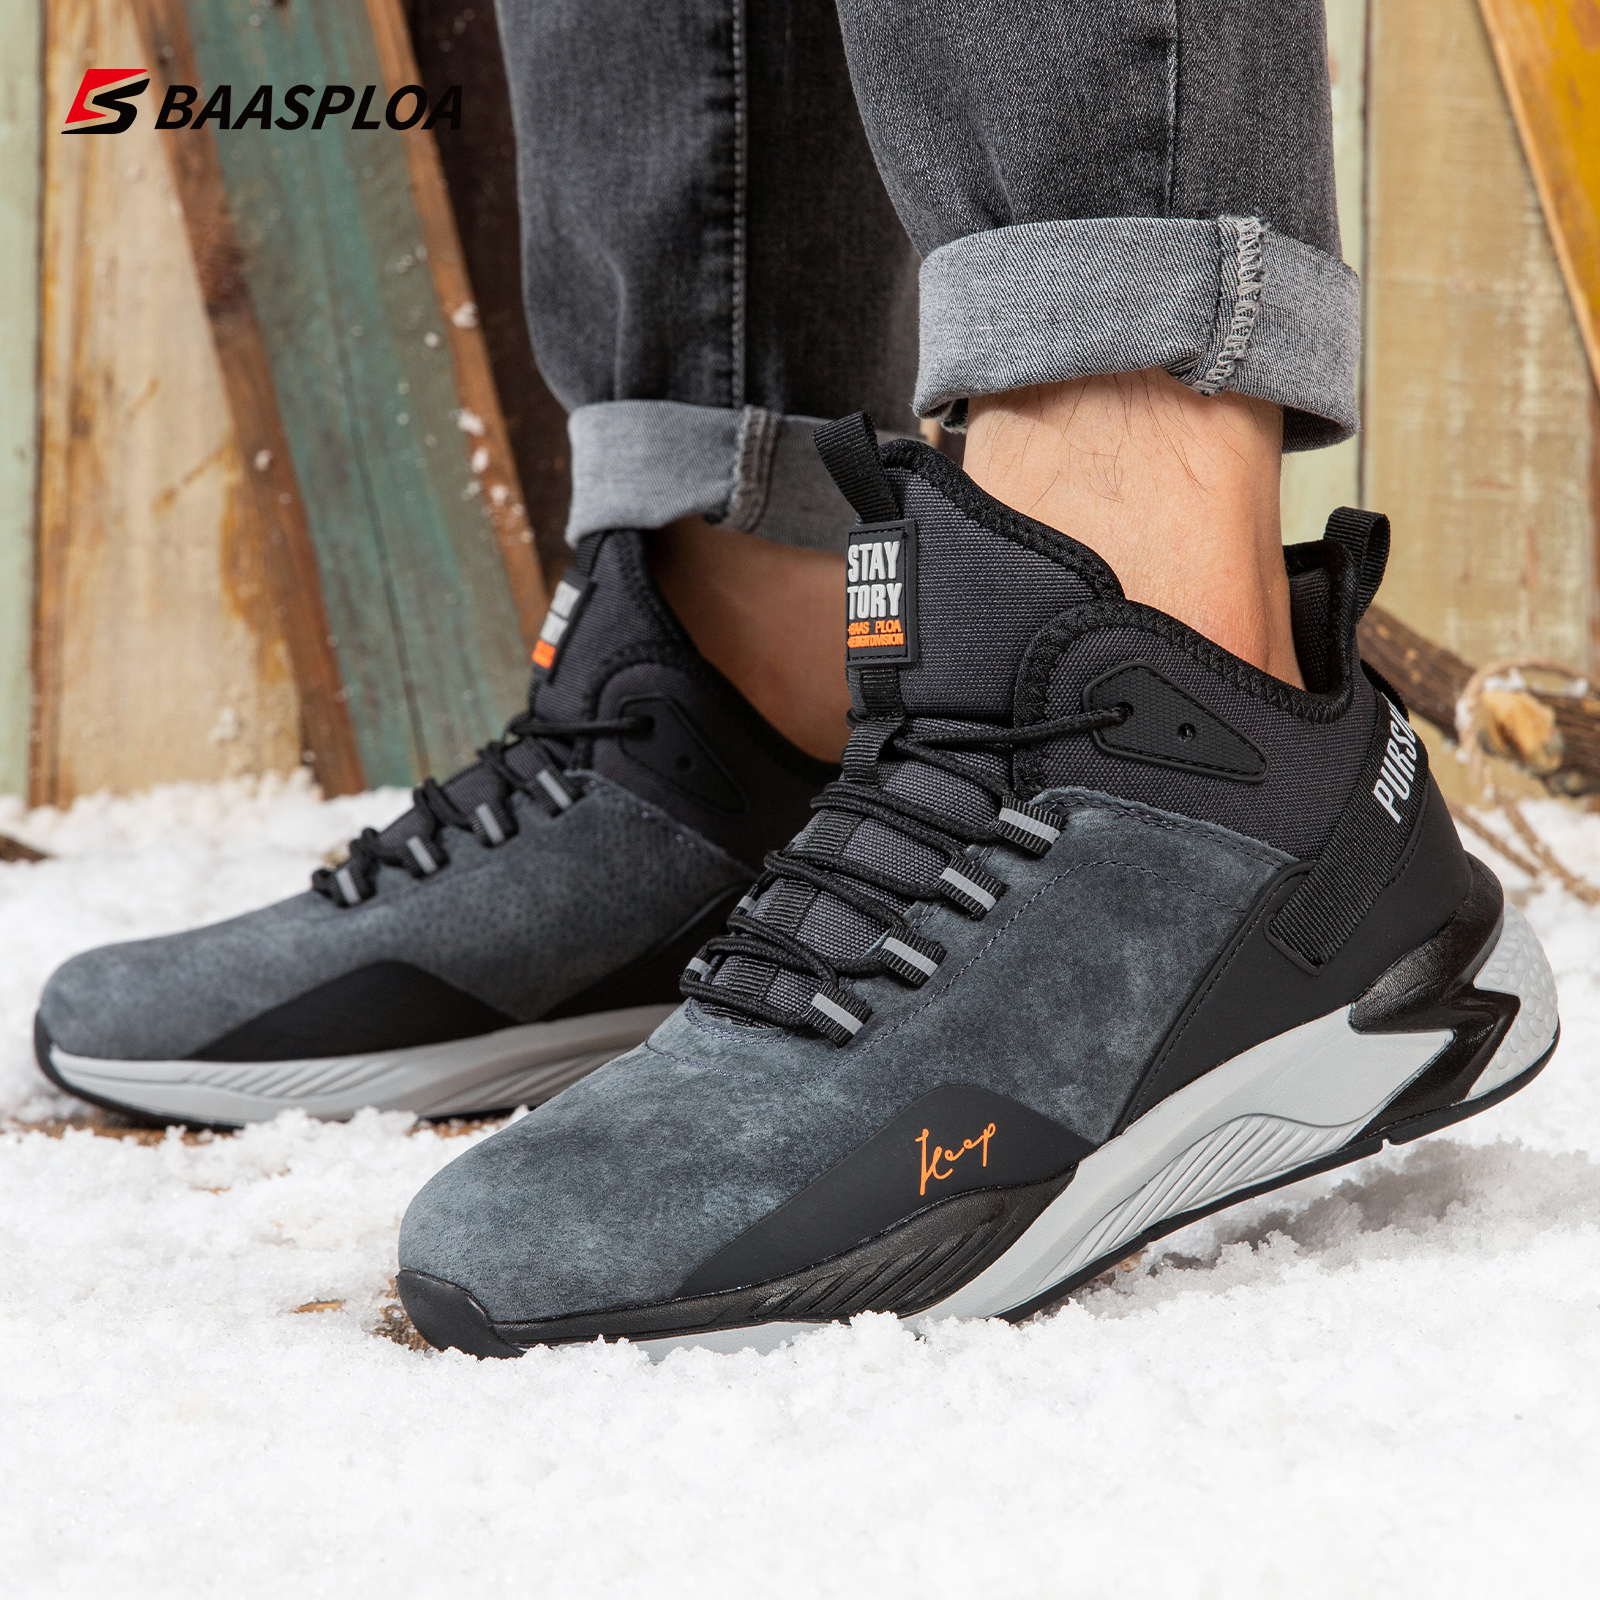 Baasploa New Winter Sneakers for Men Cotton Shoes Waterproof Non slip Casual Running Shoes Fashion Man 2